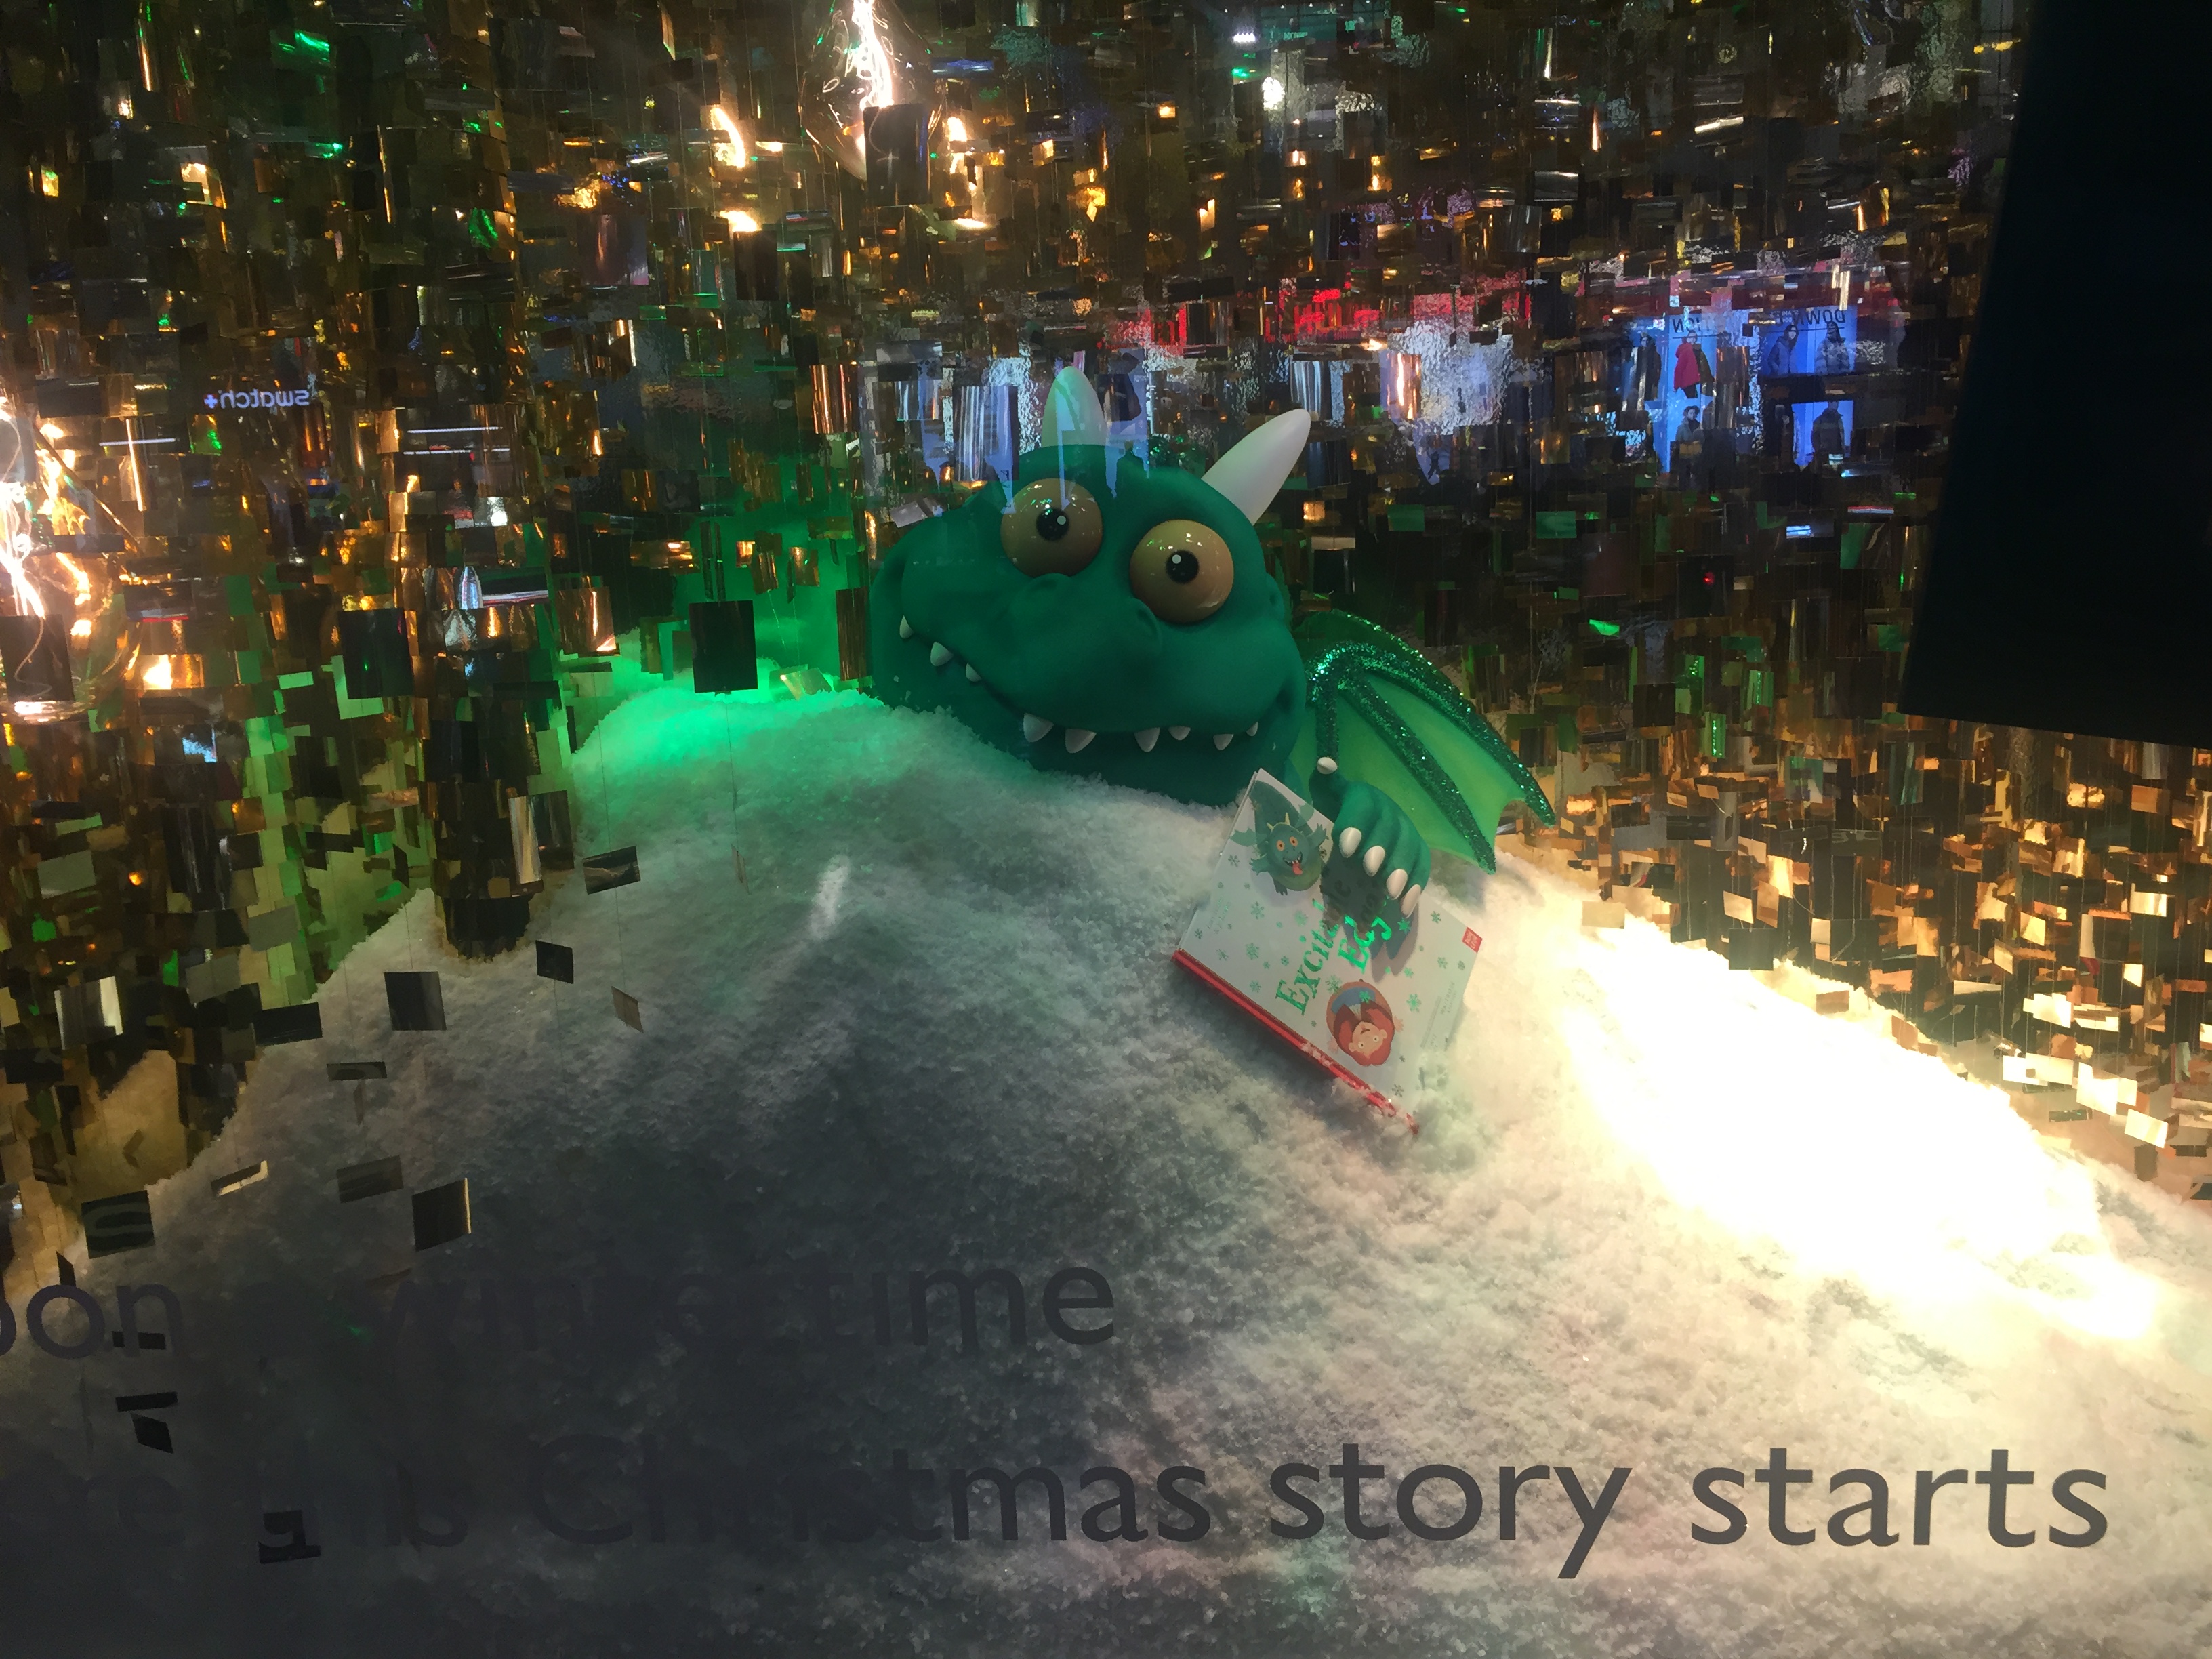 John Lewis window display showing Edgar The Dragon buried in a pile of snow with only his head showing. He has green skin, white horns and claws, yellow eyes with black pupils, and sharp white teeth. He is holding a book called Excitable Edgar in one hand, with an image of him on the cover.